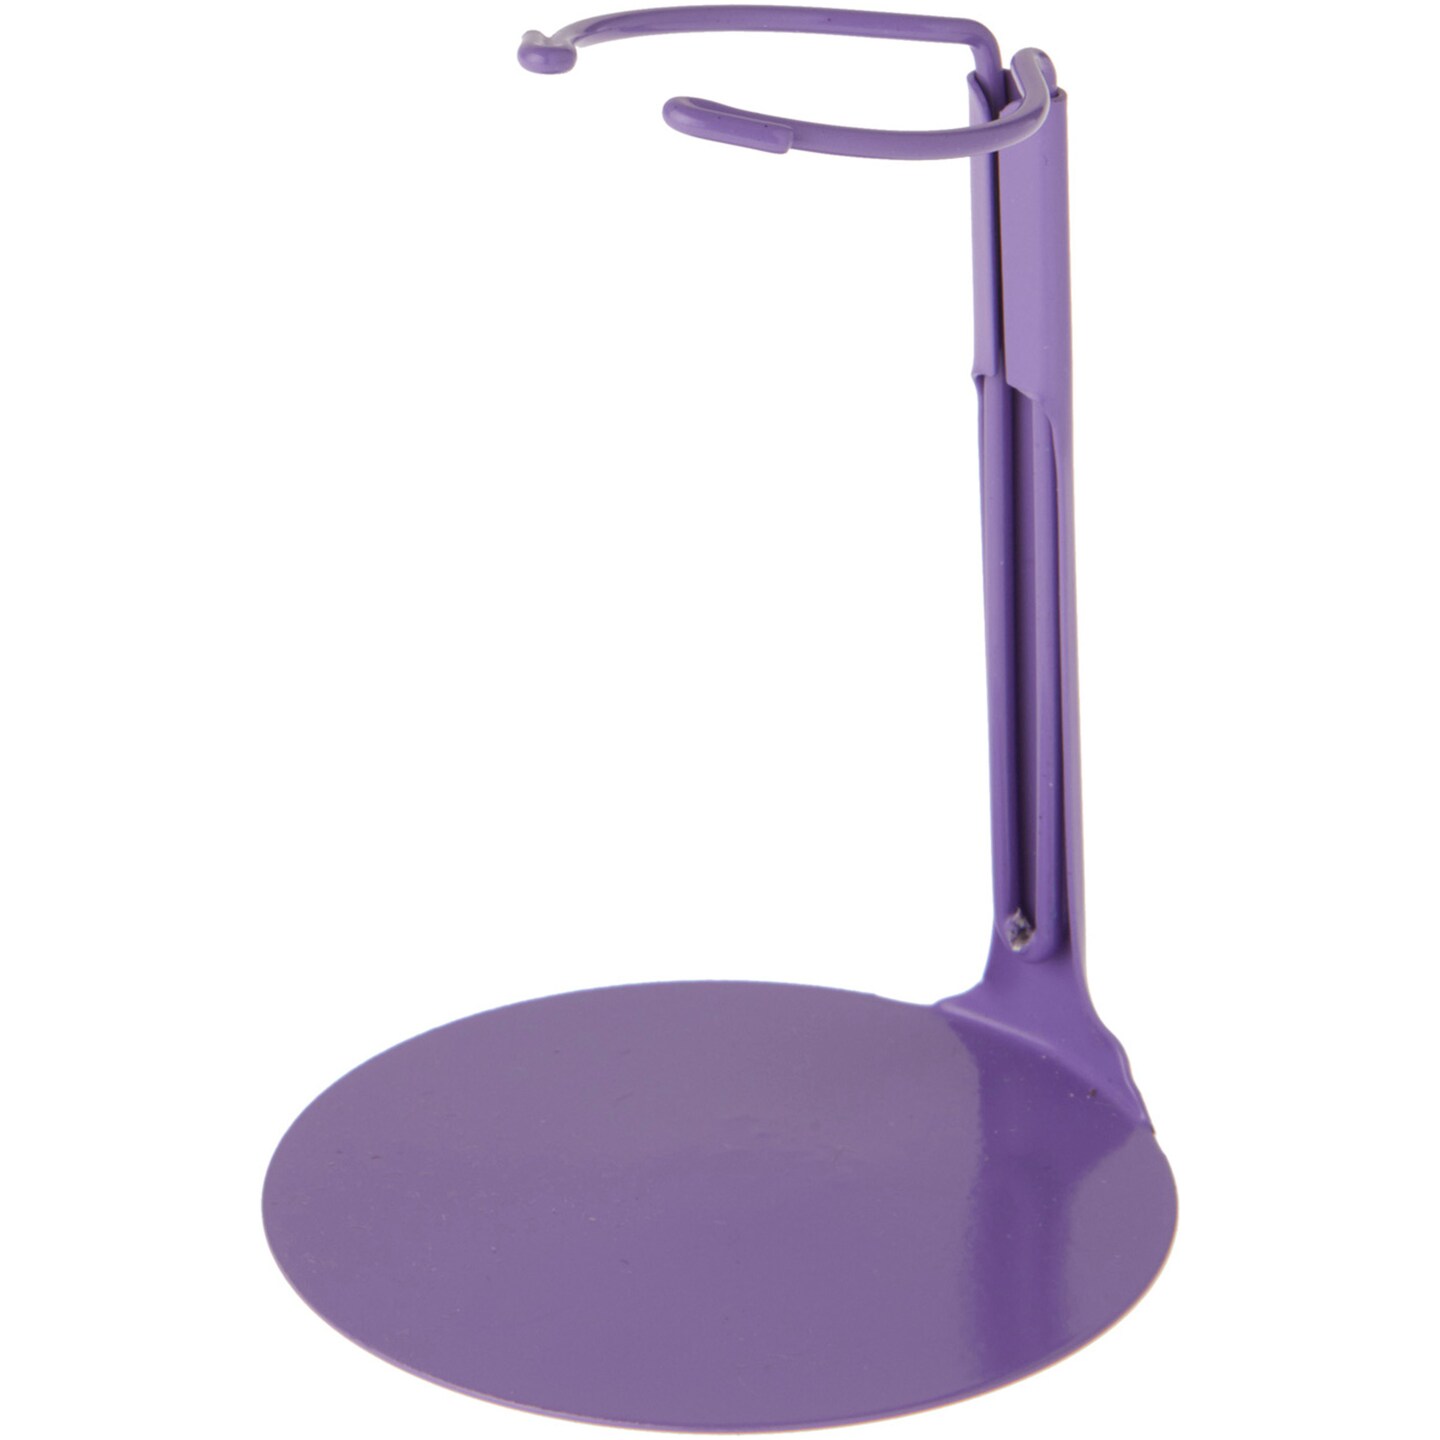 Kaiser 2090 Purple Adjustable Doll Stand, fits 6.5 to 11 inch Dolls or Action Figures, waist width adjusts from 1.375 to 1.75 inches